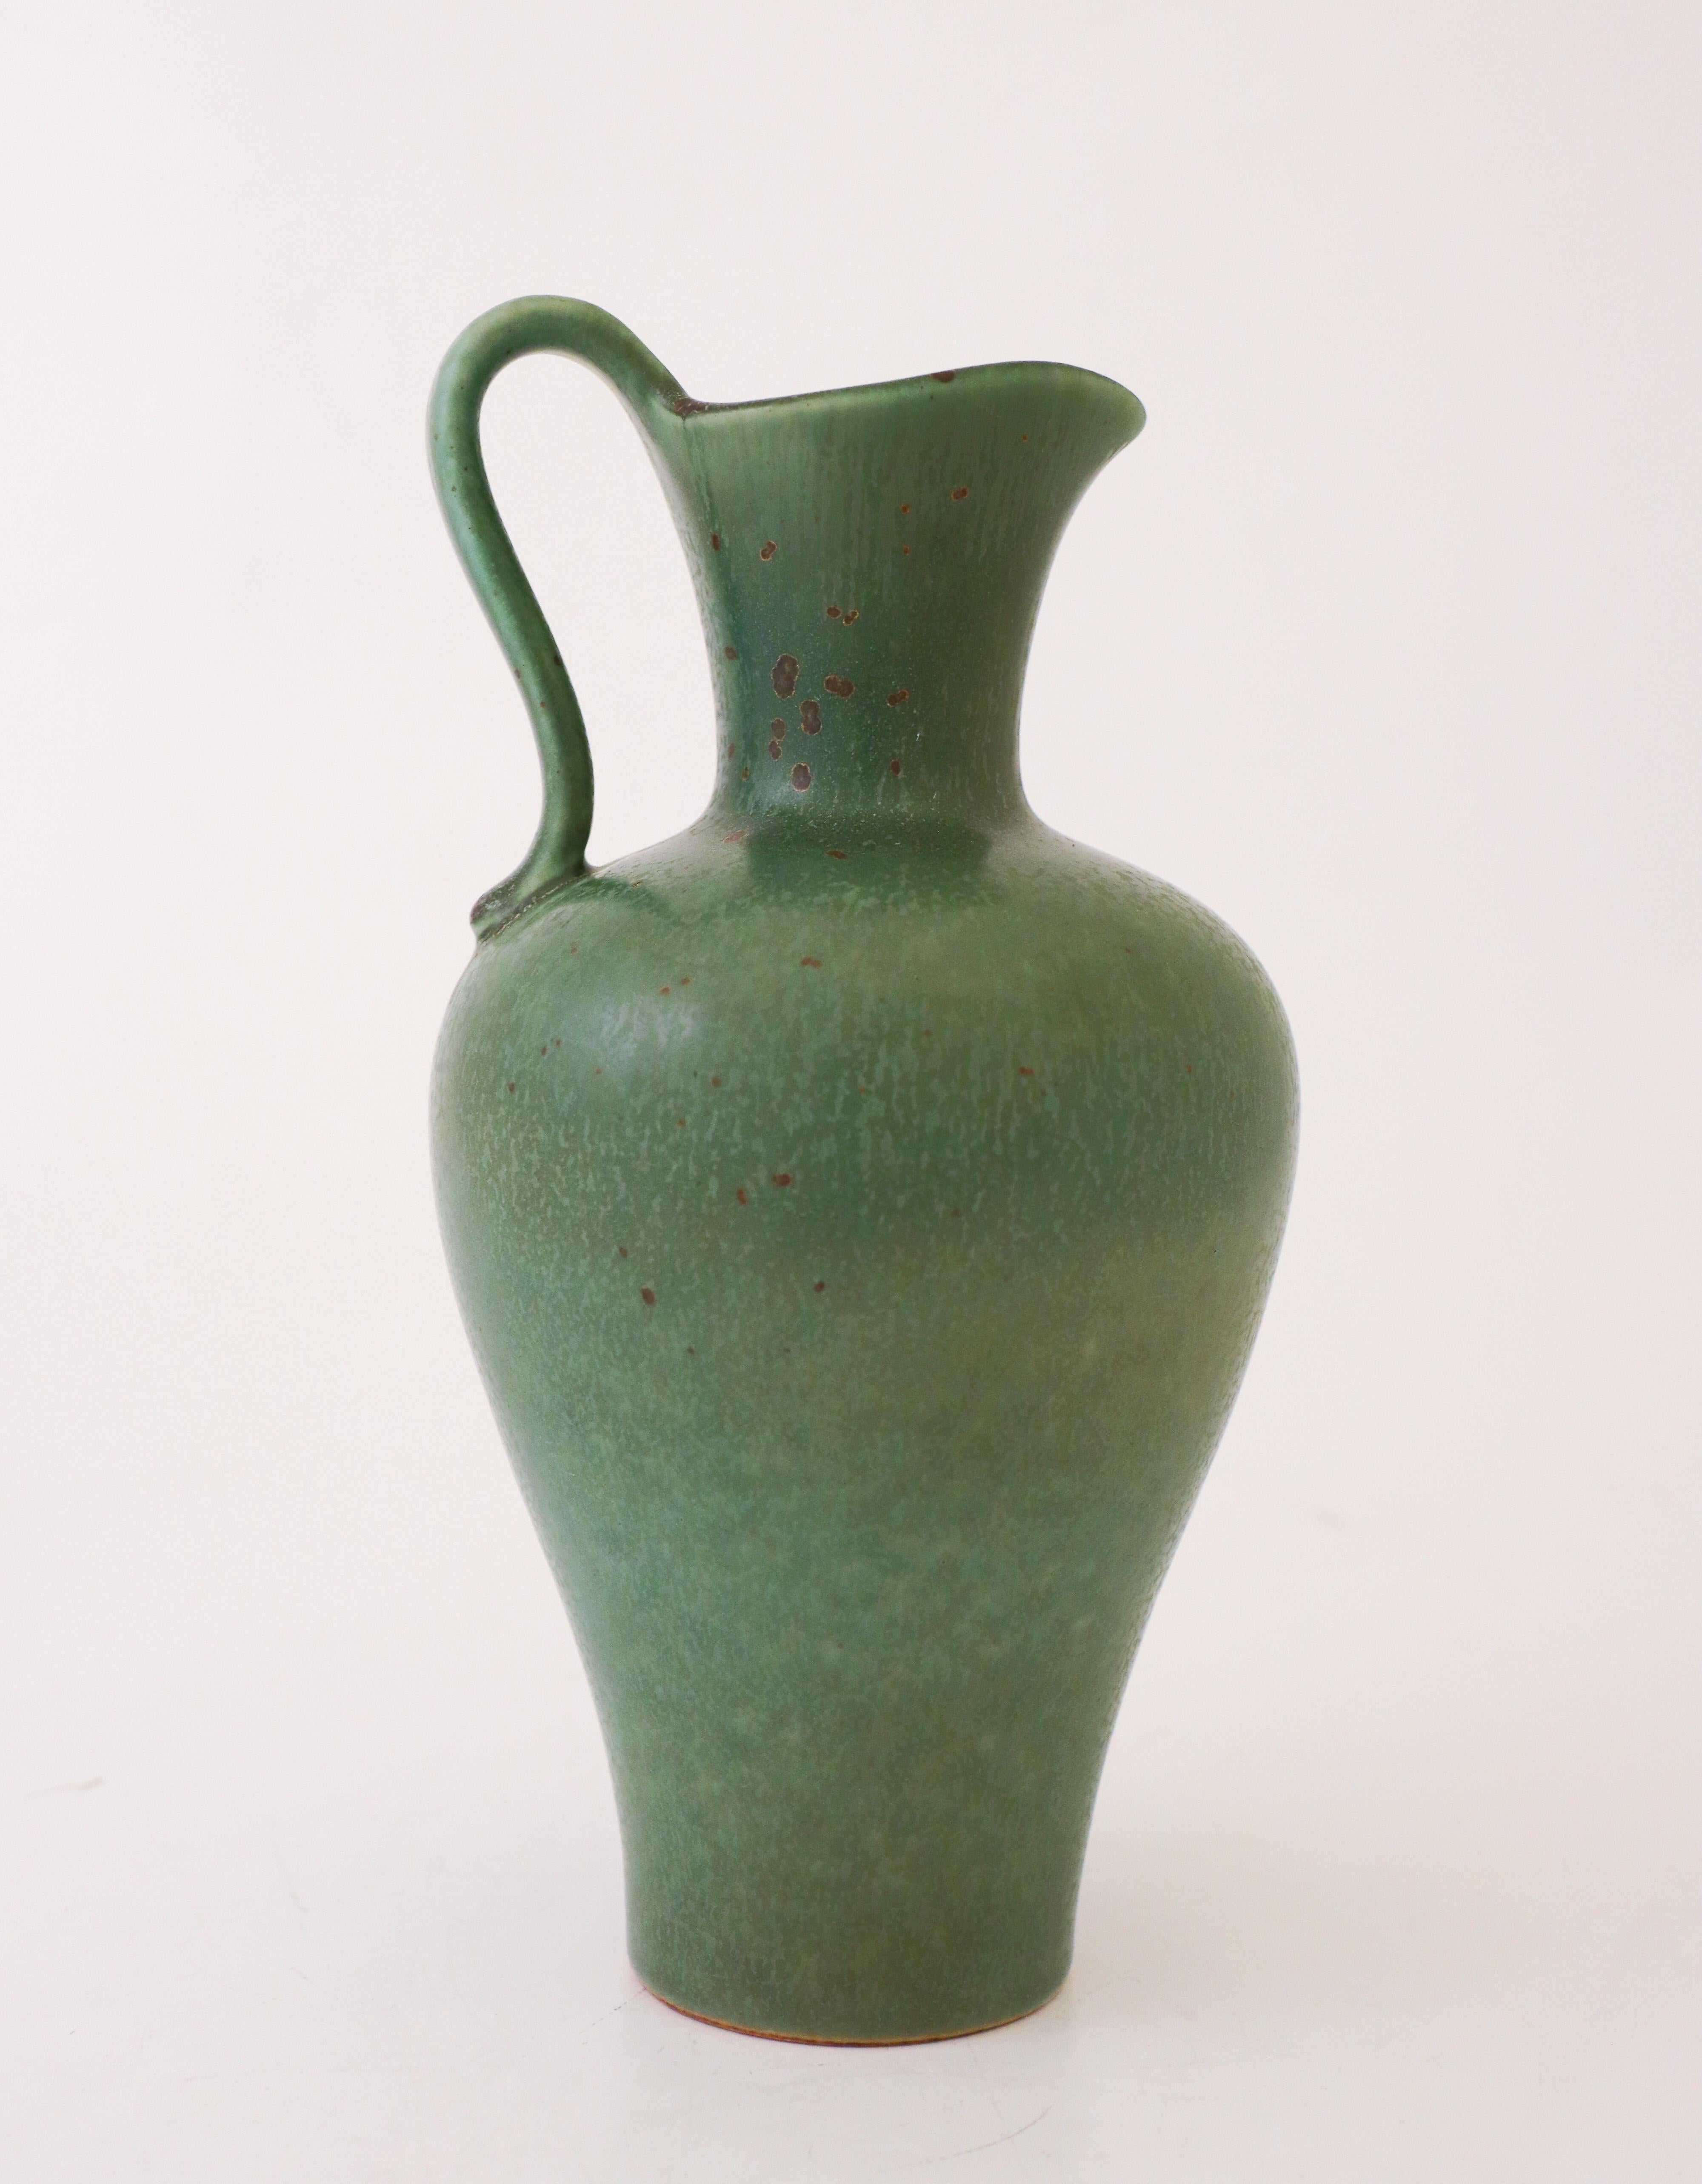 A deep green vase with a lovely glaze designed by Gunnar Nylund at Rörstrand, the vase is 22,5 cm (9